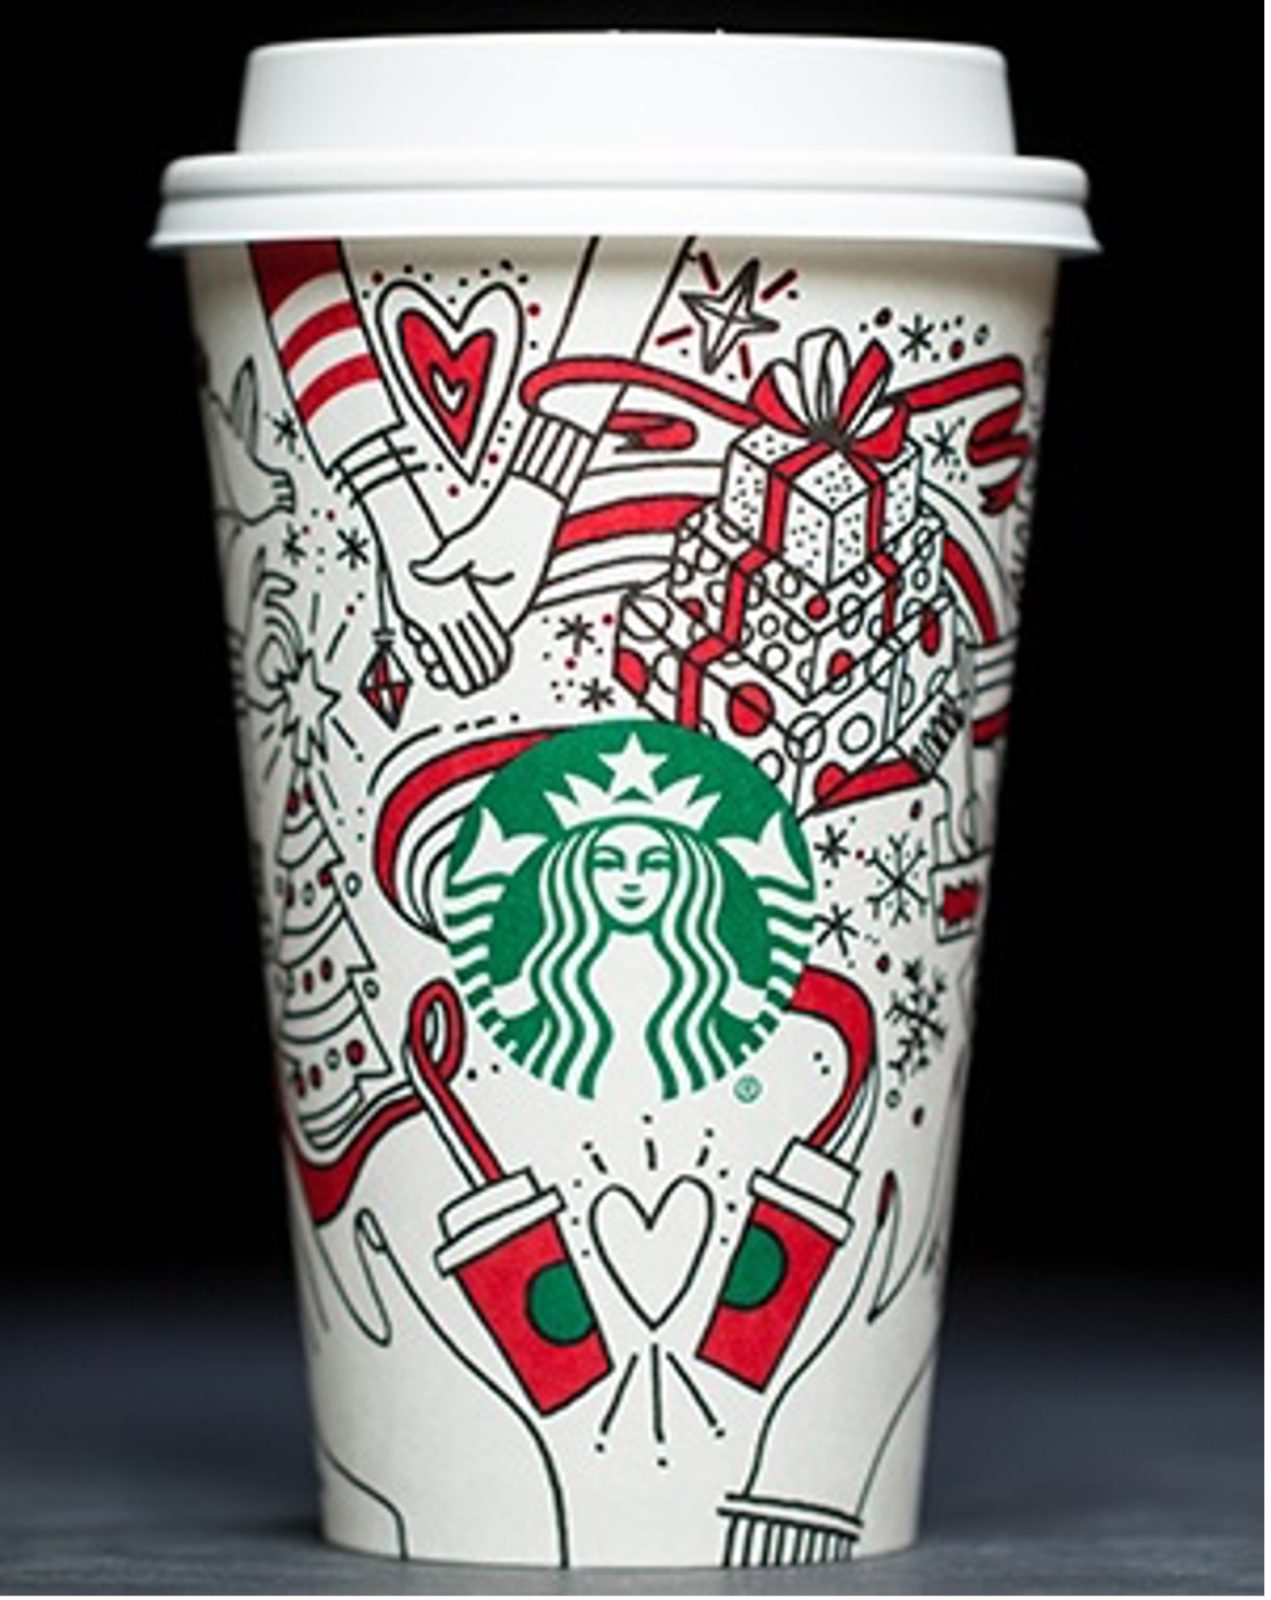 2017 Starbucks Hands Holding Cup